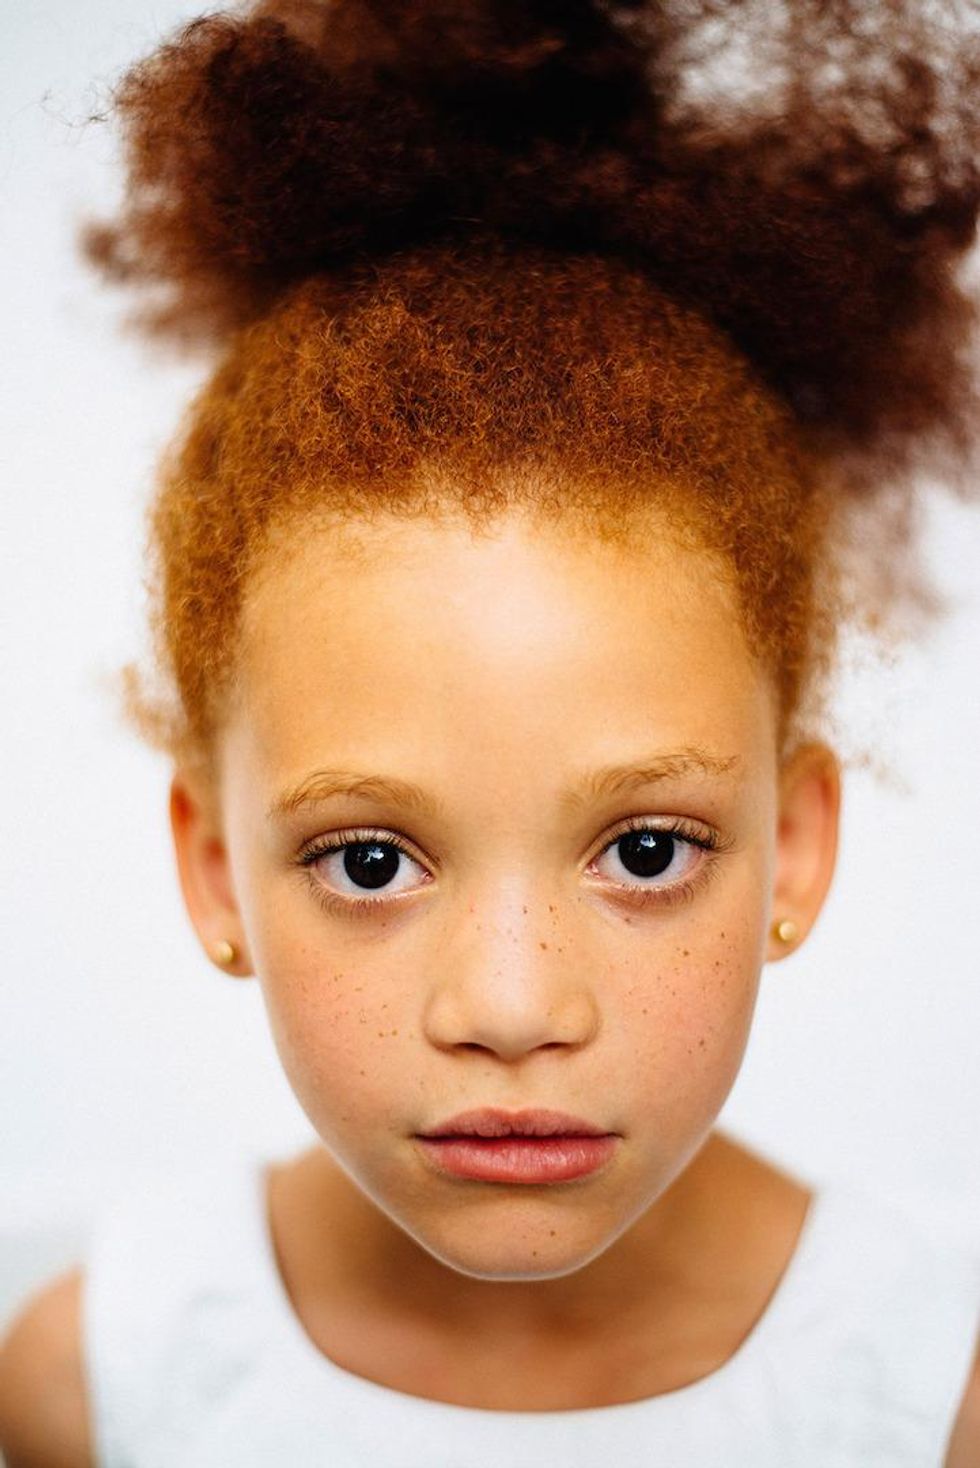 7 gorgeous photos of redheads that challenge the way we see race - Upworthy